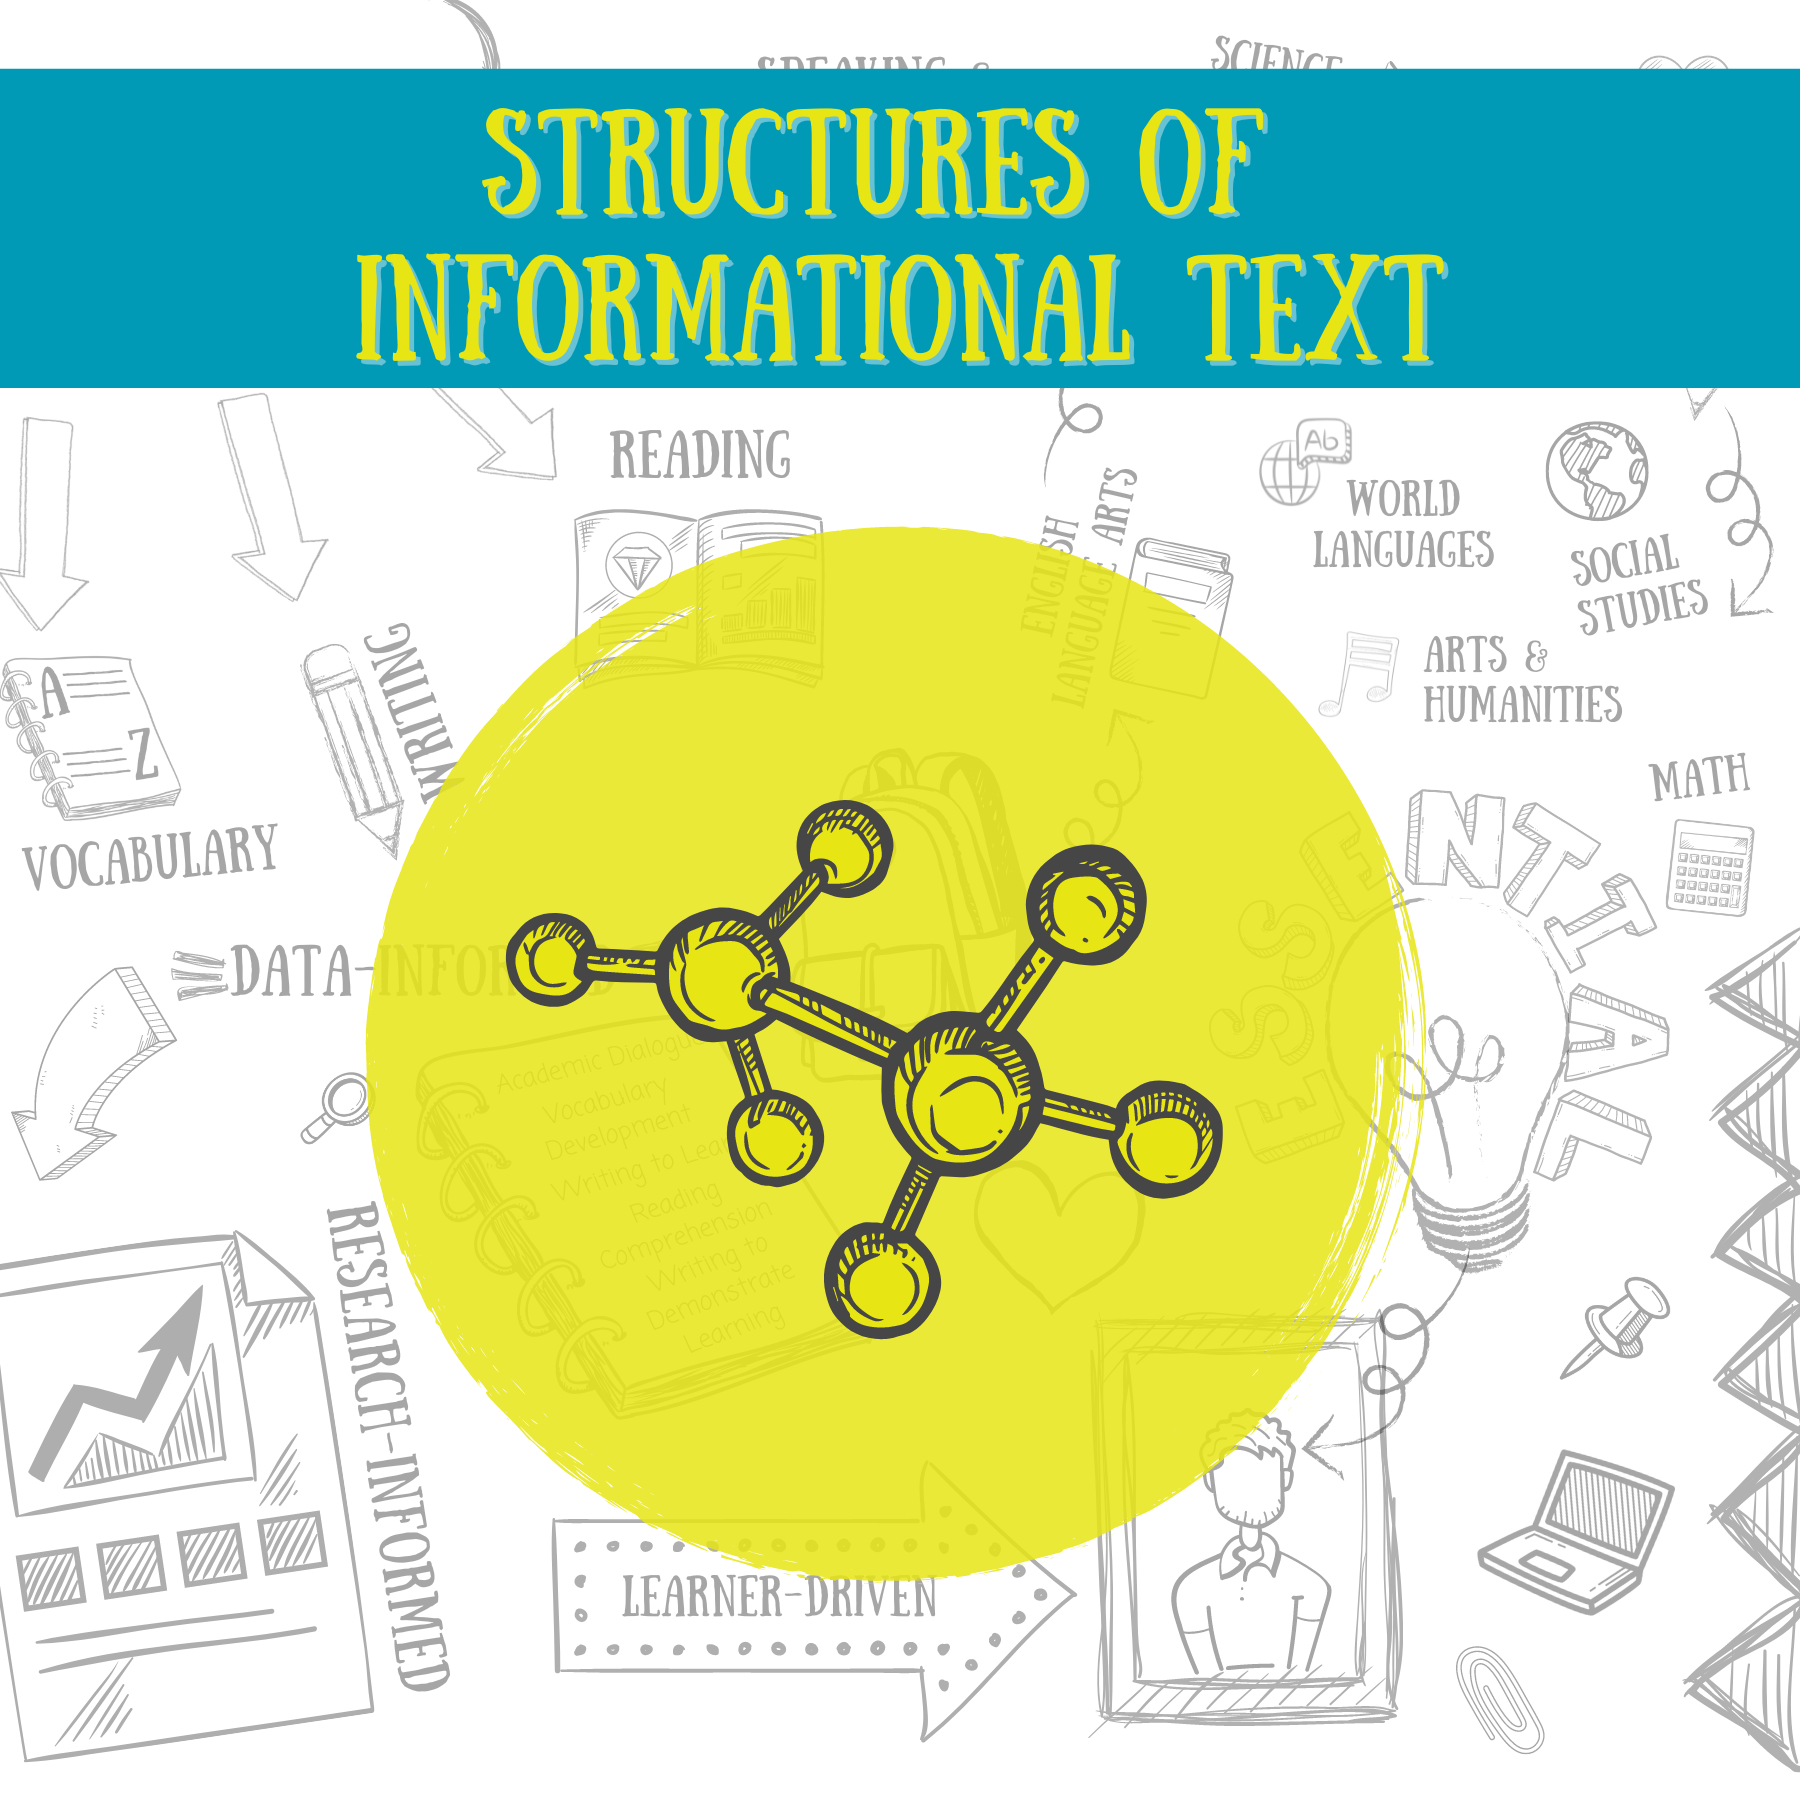 Adolescent Literacy Model Structures of Informational Text